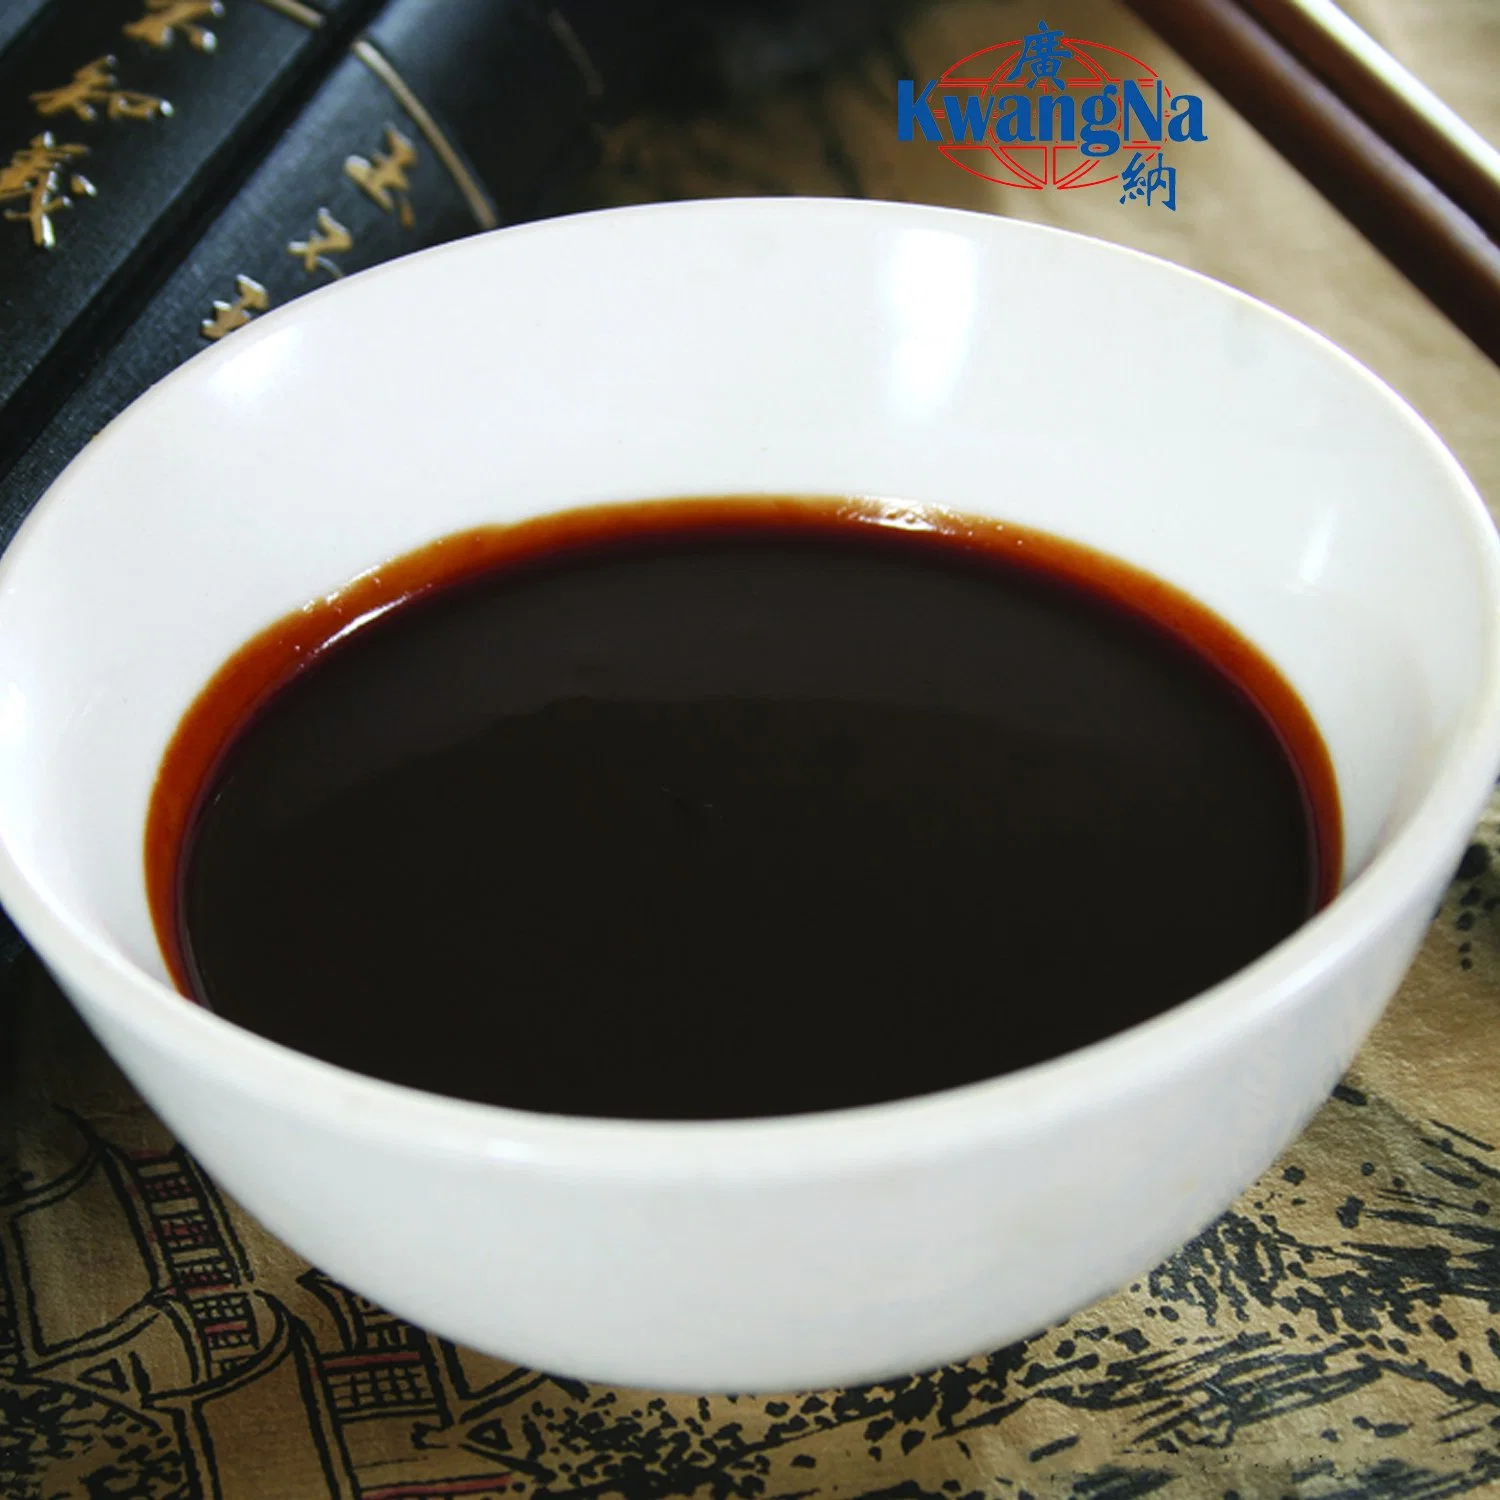 Superior Light Soy Sauce/Top Grade Soy Sauce/Chinese Supplier/Delicious Taste Light Soy Sauce